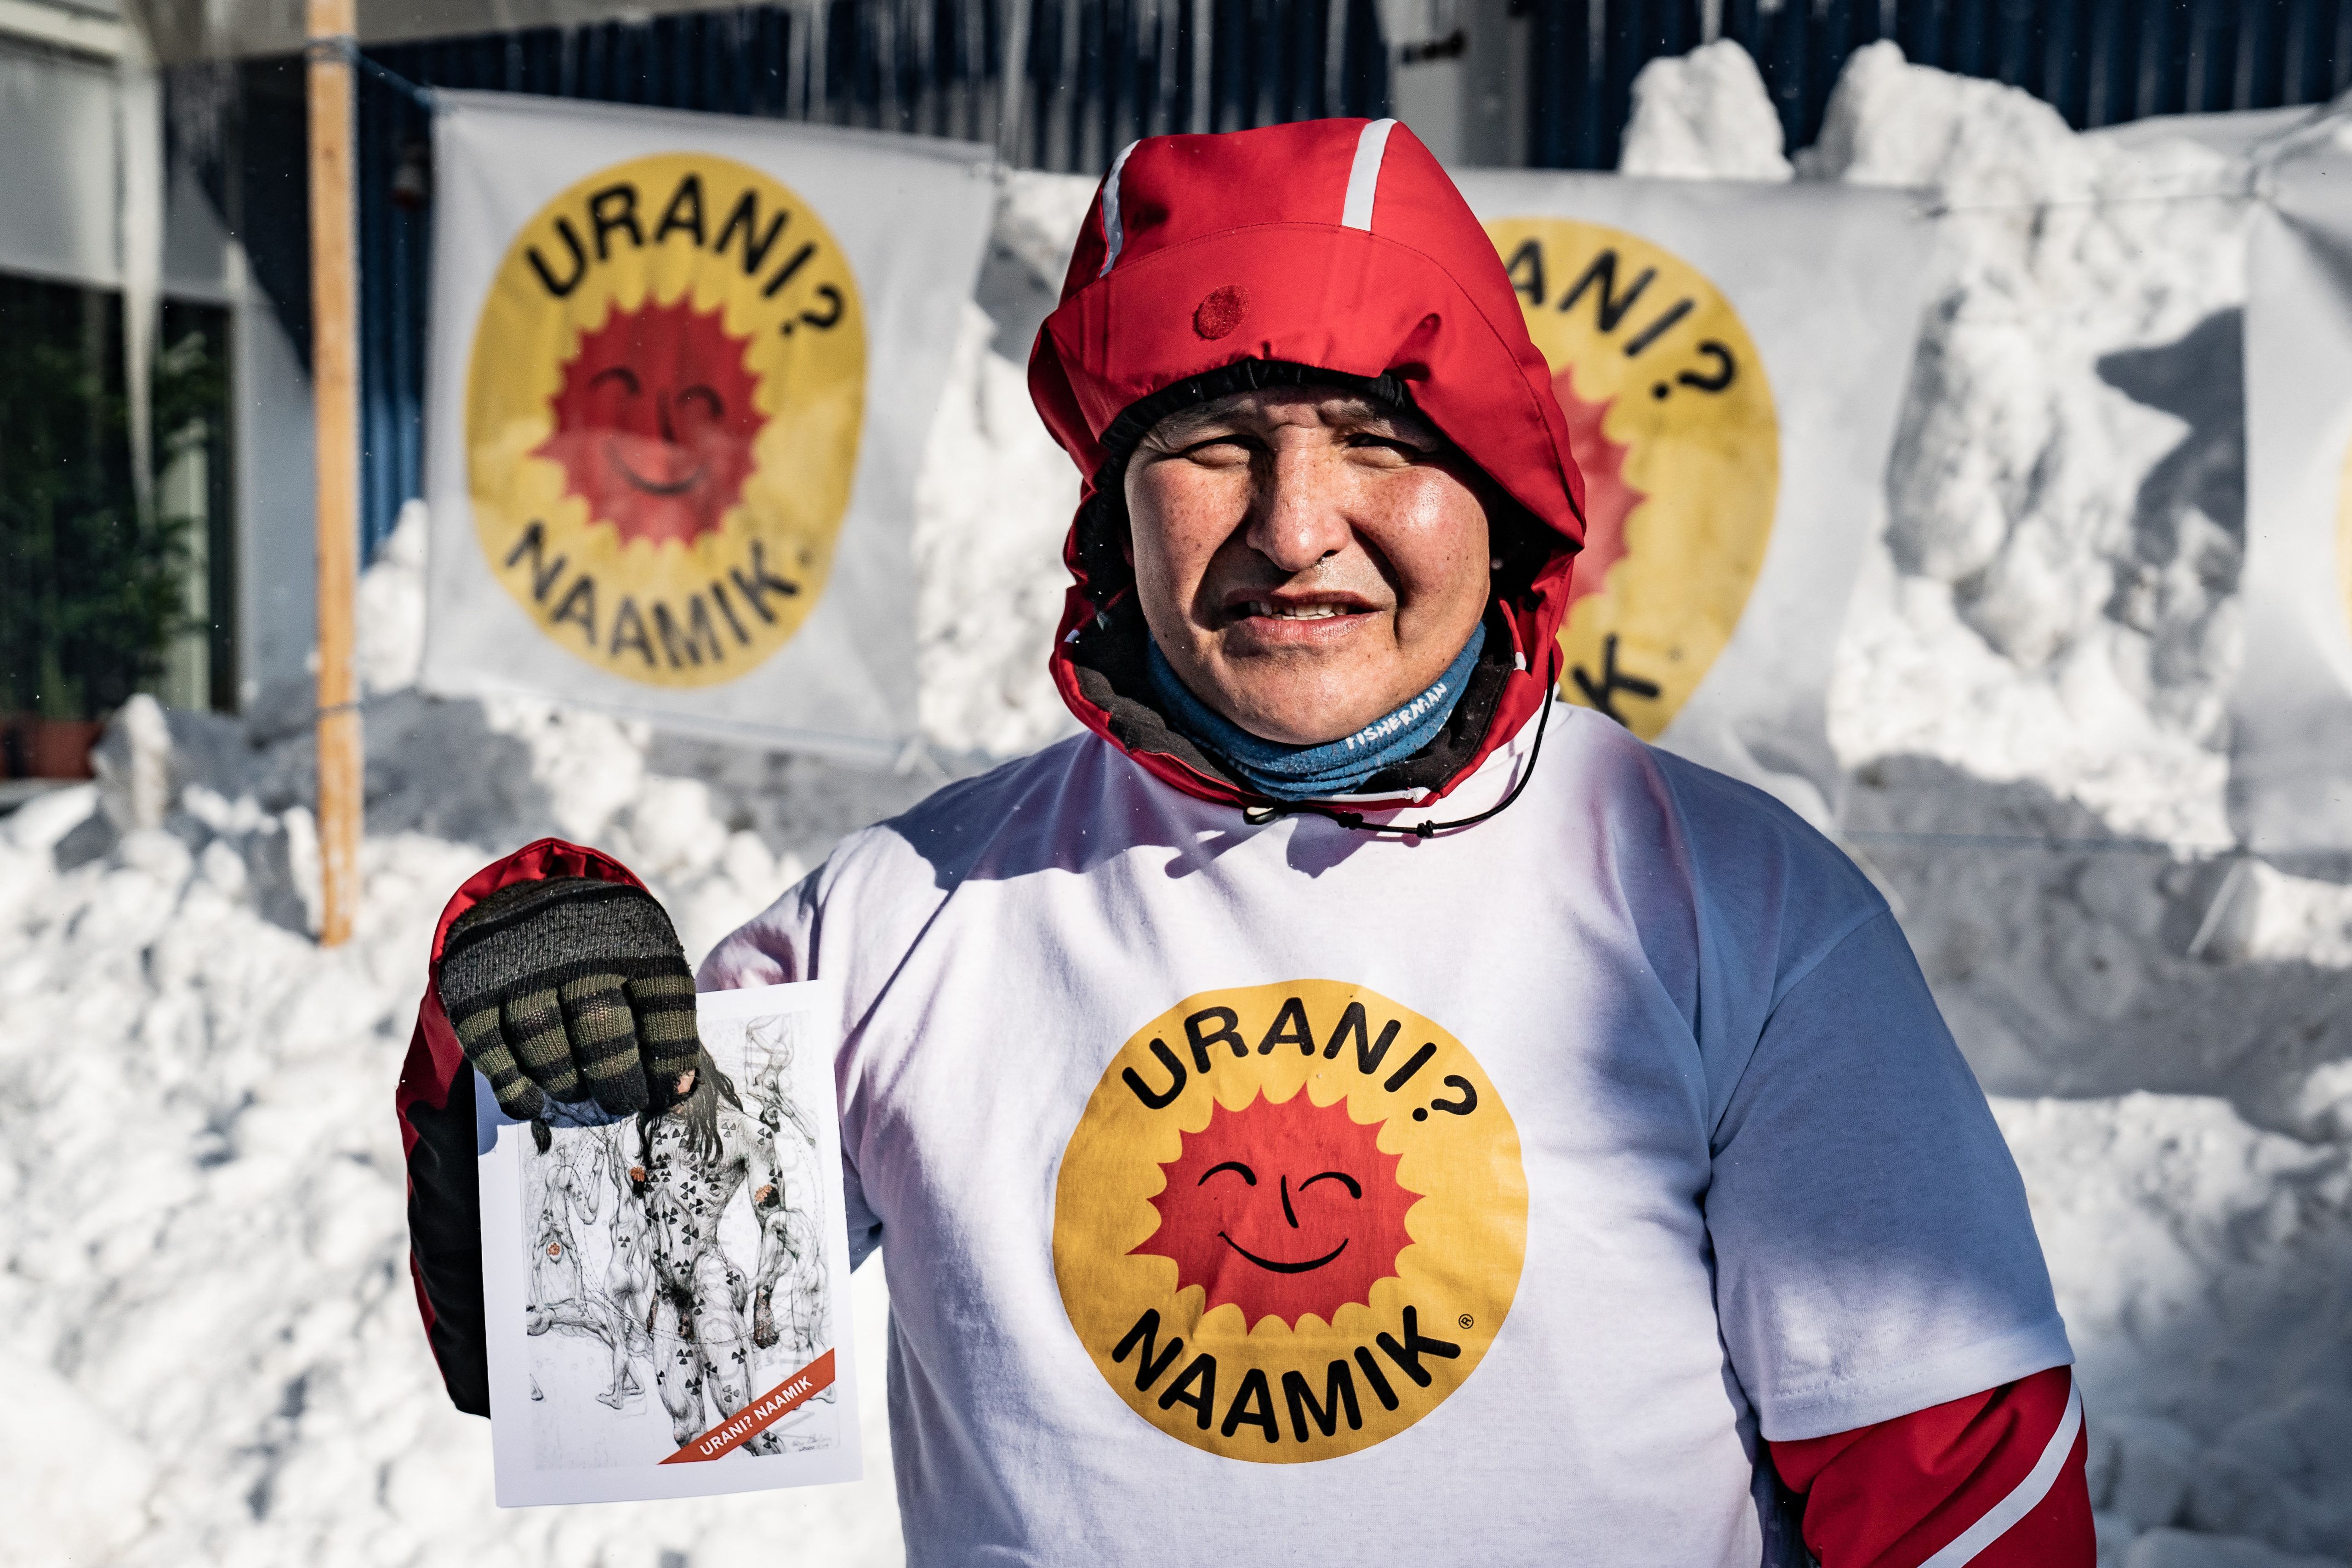 A member of environmental organization Urani Naamik (Uranium, No Thank You) holds up a flyer in front of posters in Nuuk, Greenland, a few days ahead of legislative elections photo.